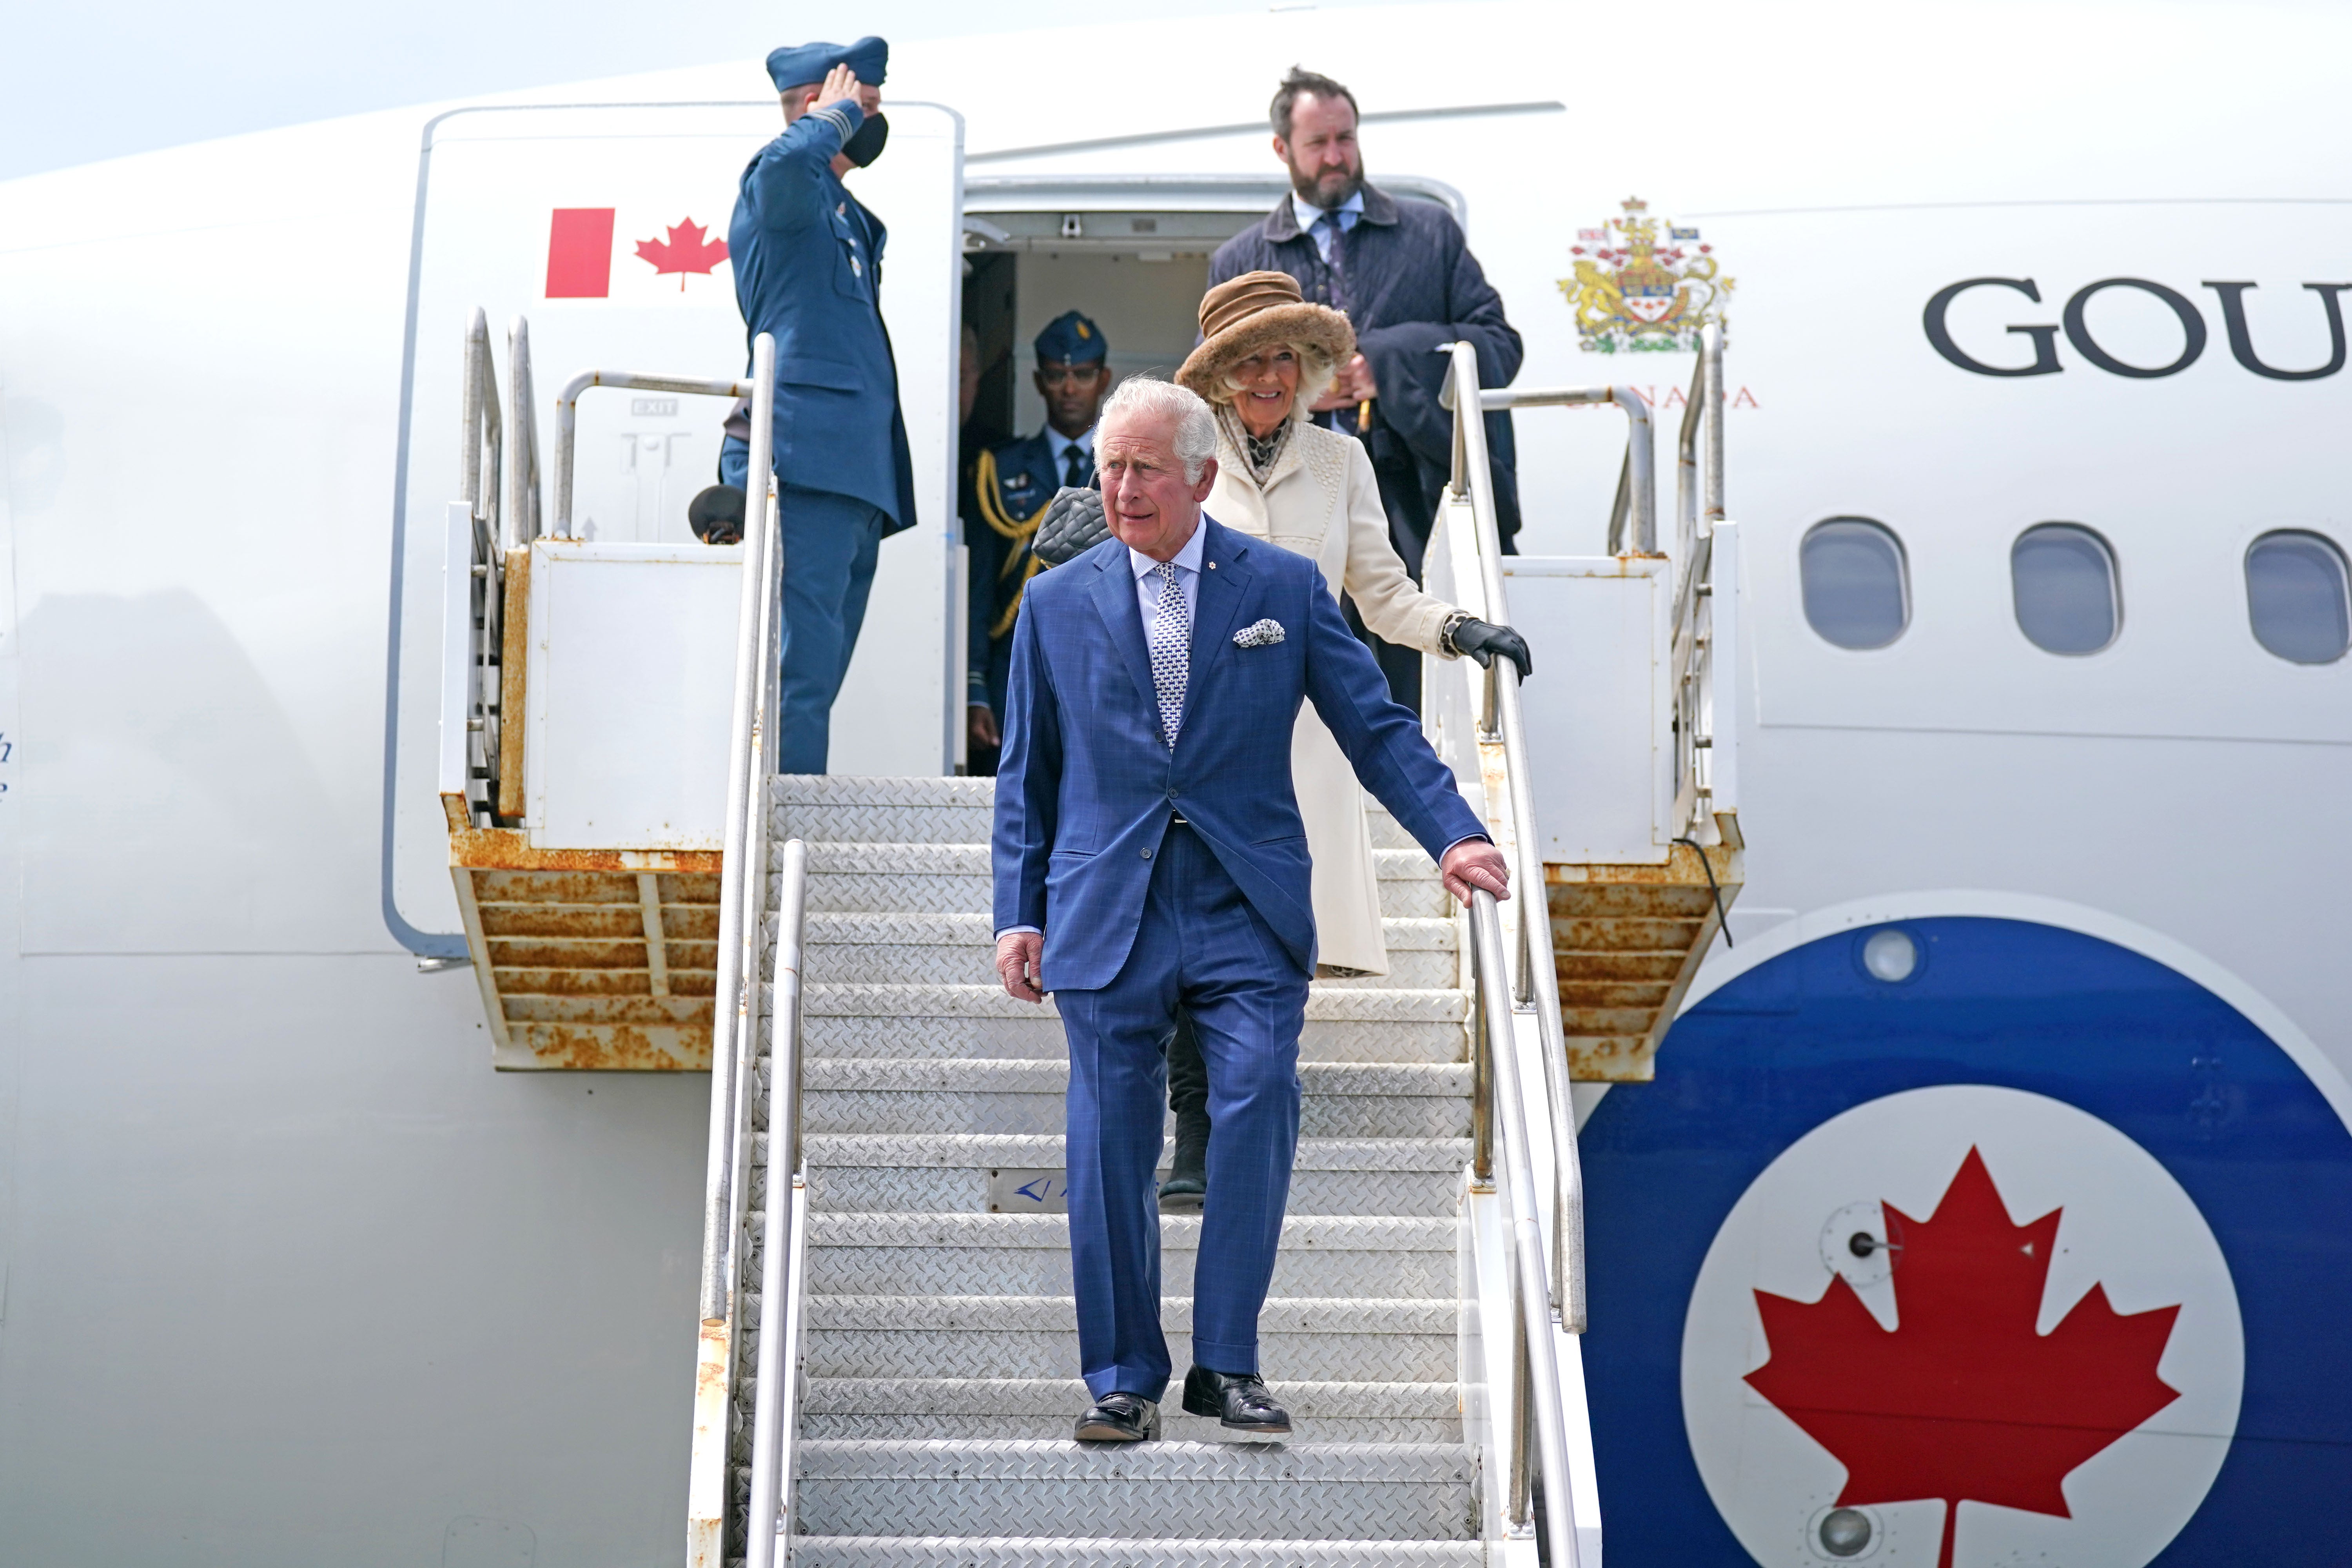 The Prince of Wales and Duchess of Cornwall arrive in St John’s, Newfoundland and Labrador, for their three-day trip to Canada to mark the Queen’s Platinum Jubilee (Jacob King/PA)